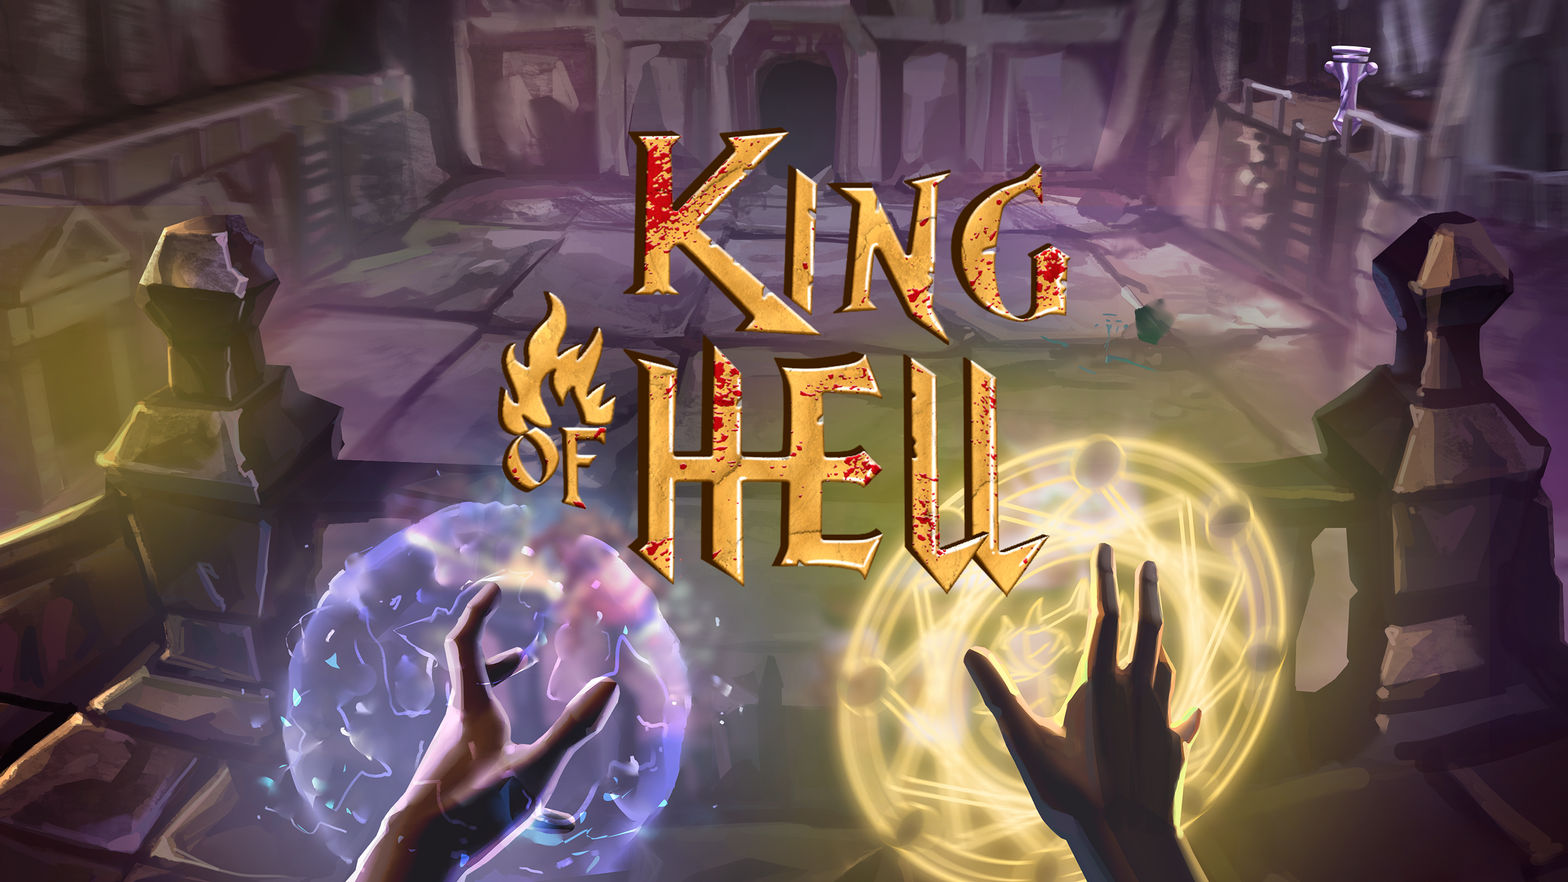 King Of Hell - Prototype Version